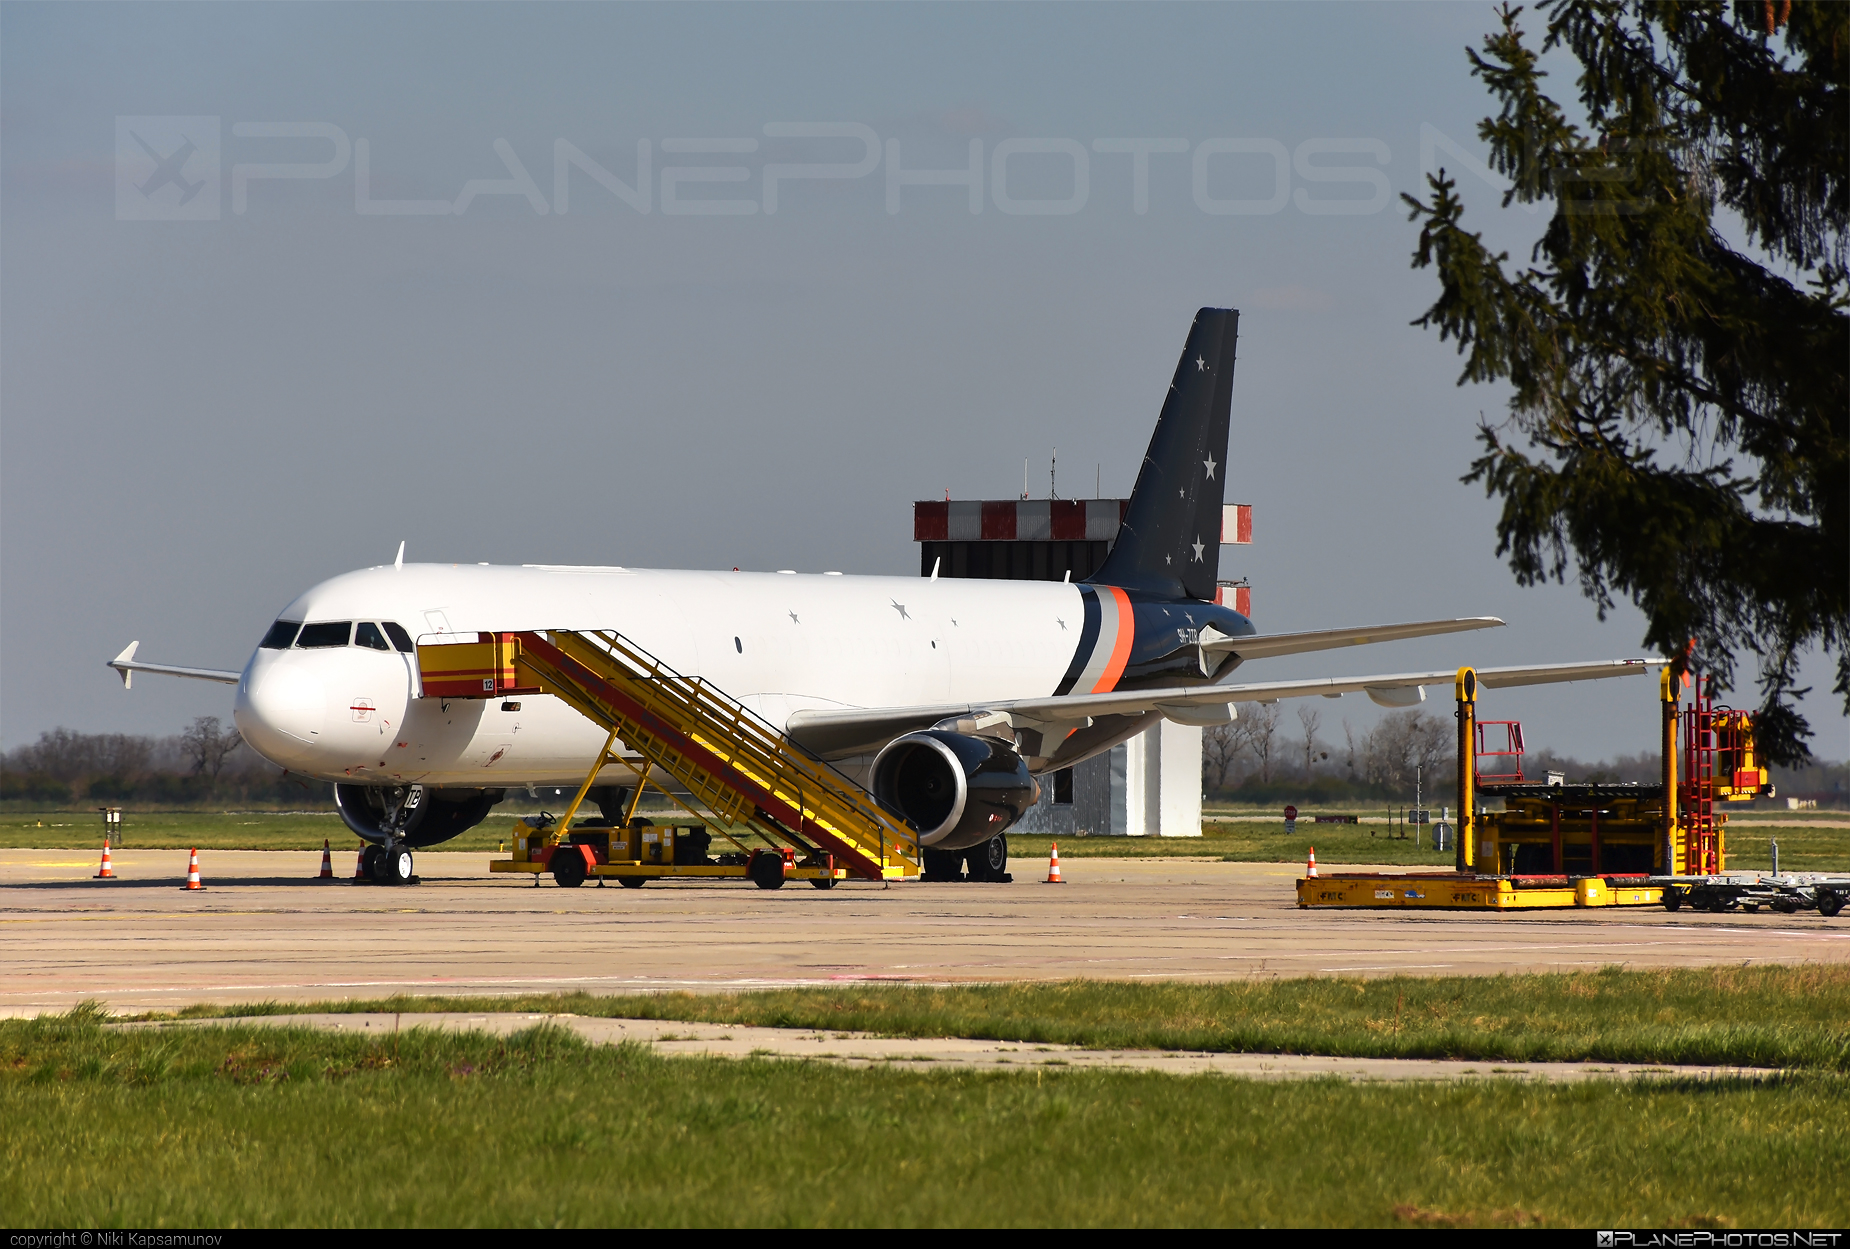 Airbus A321-211P2F - 9H-ZTB operated by Titan Airways #a321freighter #a321p2f #airbus #titanairways